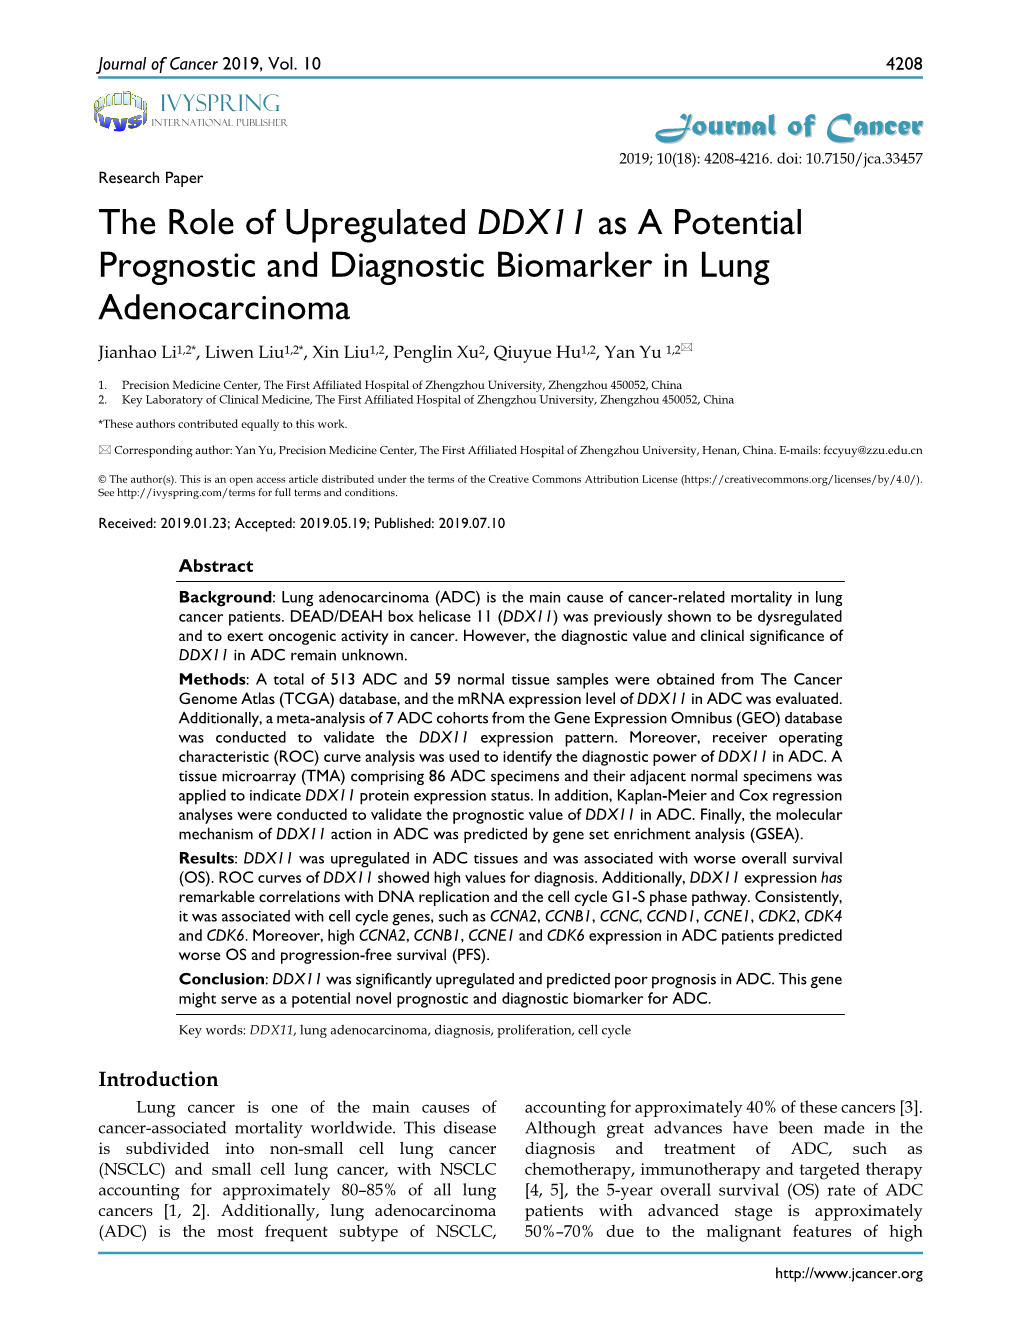 The Role of Upregulated DDX11 As a Potential Prognostic and Diagnostic